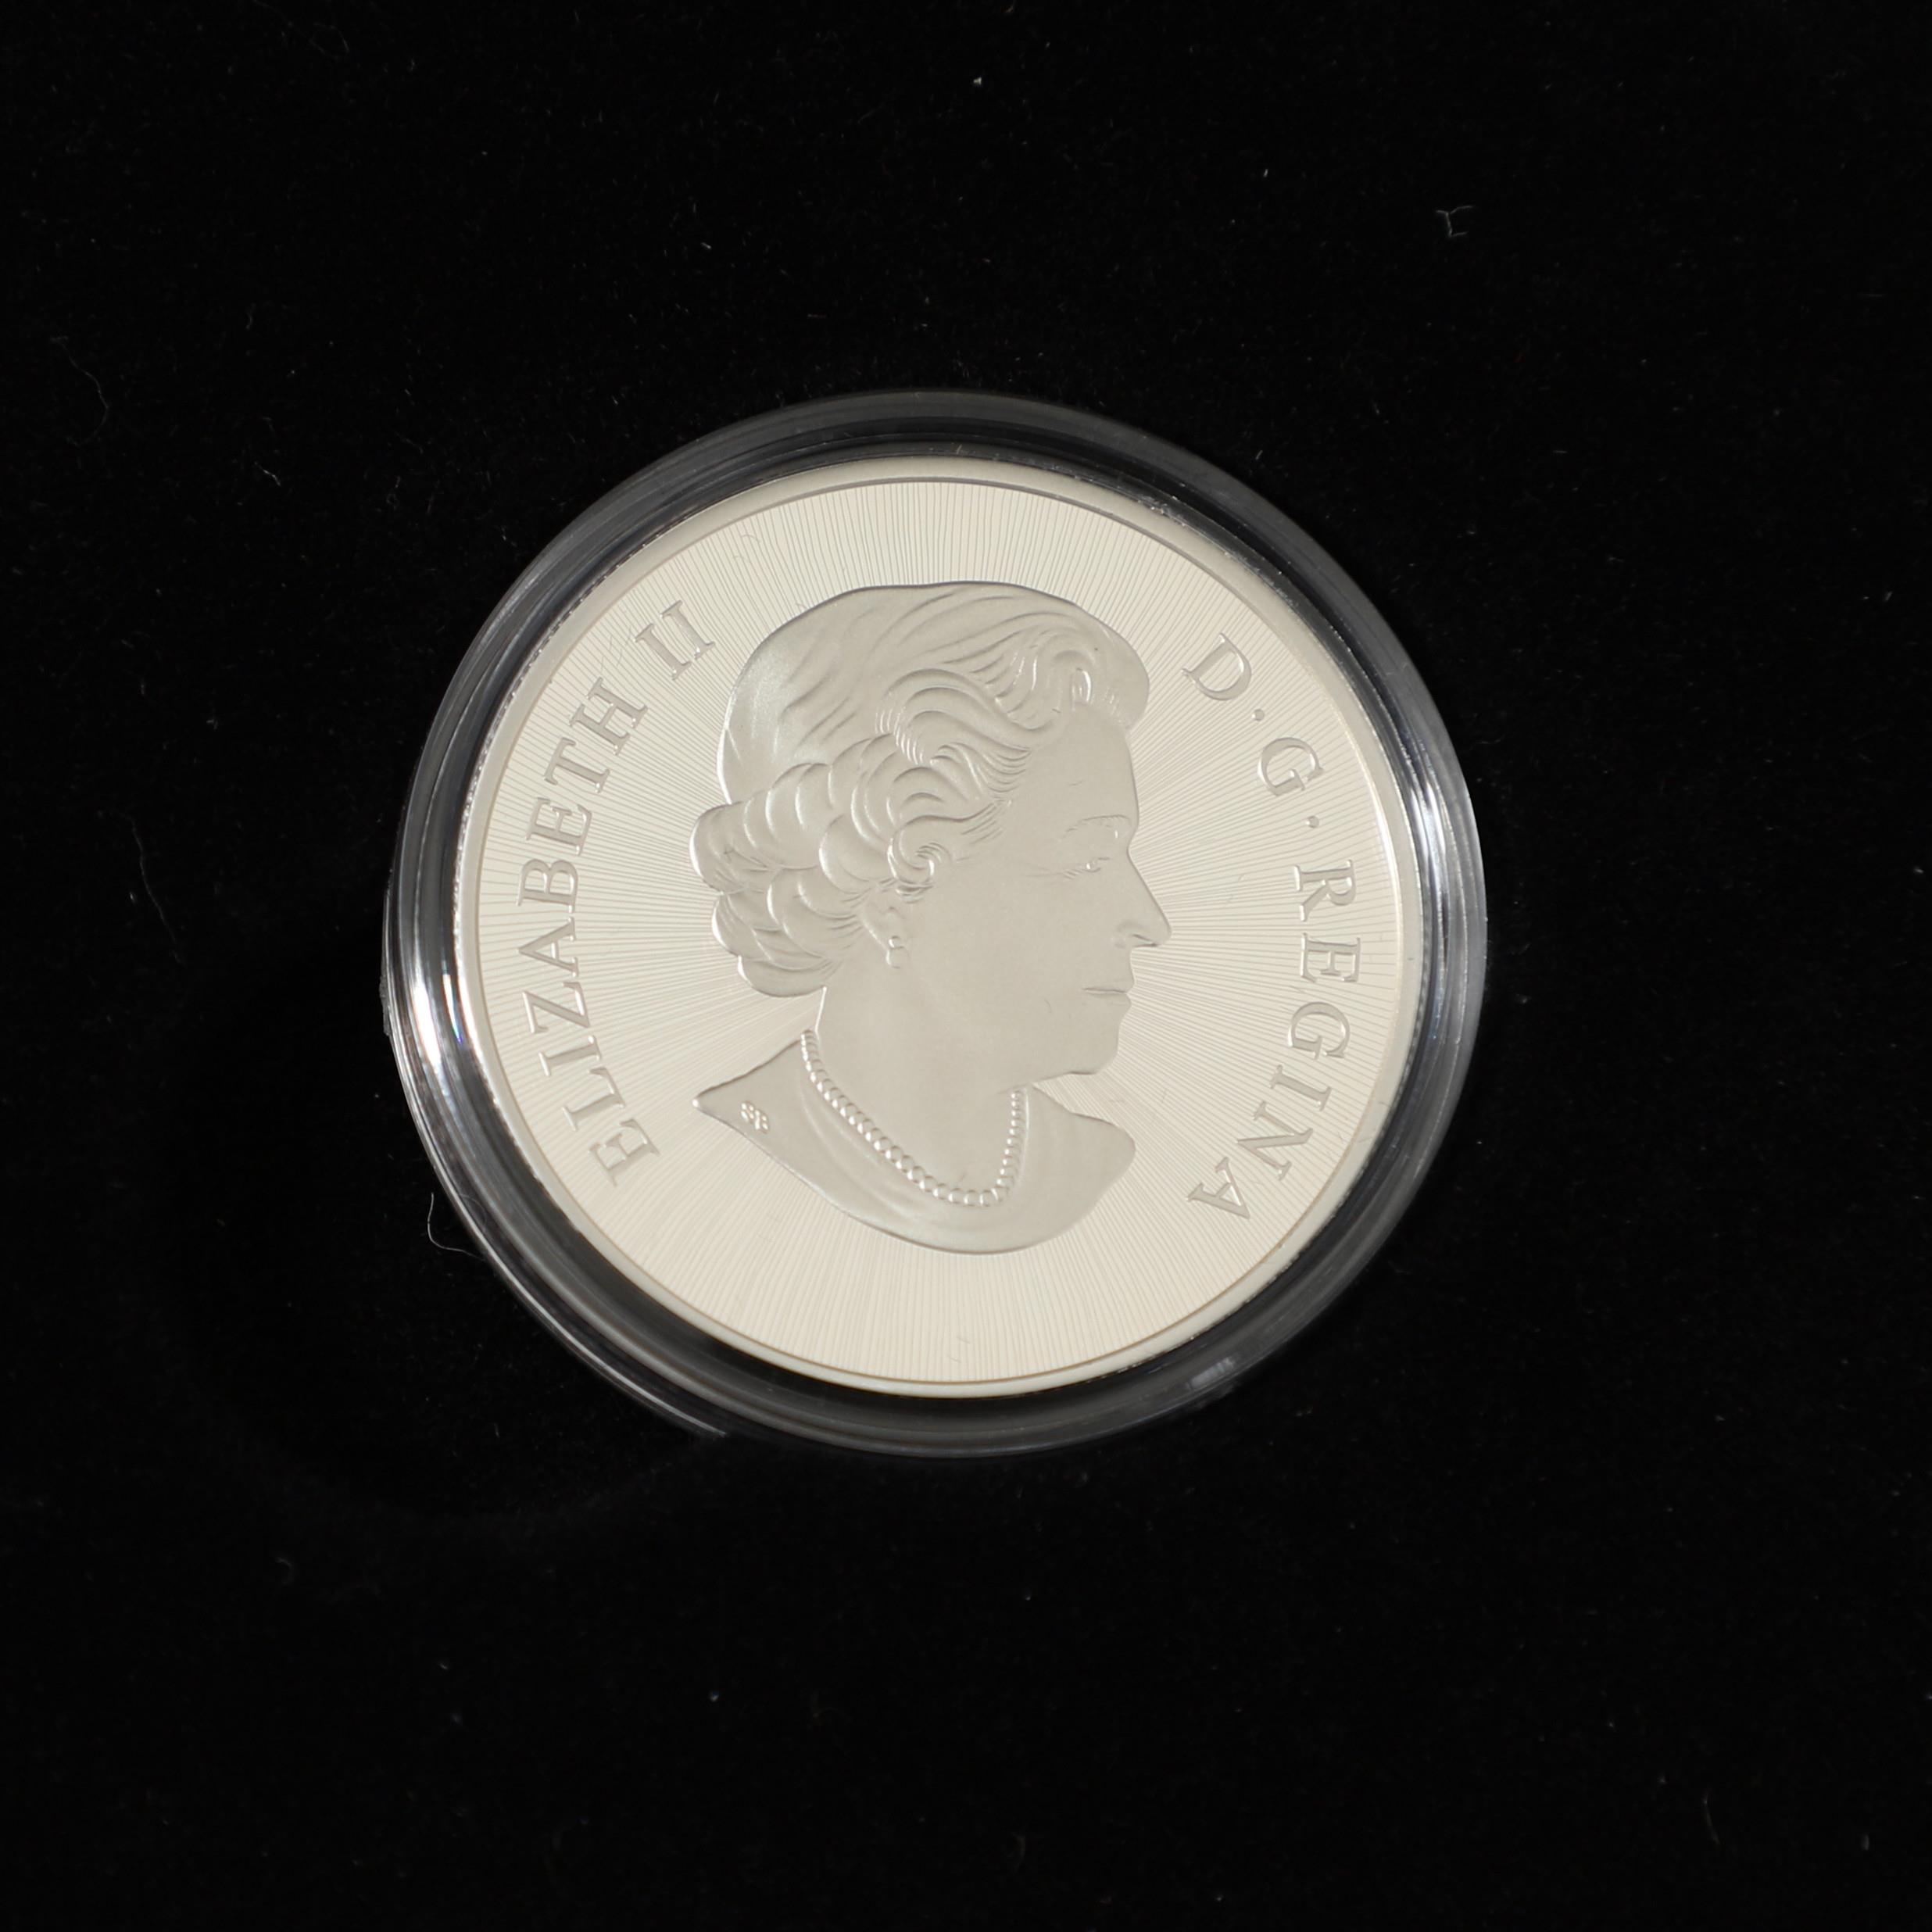 AN ELIZABETH II ROYAL CANADIAN MINT SILVER FIVE COIN 'MAPLE MASTERS' COLLECTION. 2019. - Bild 5 aus 15